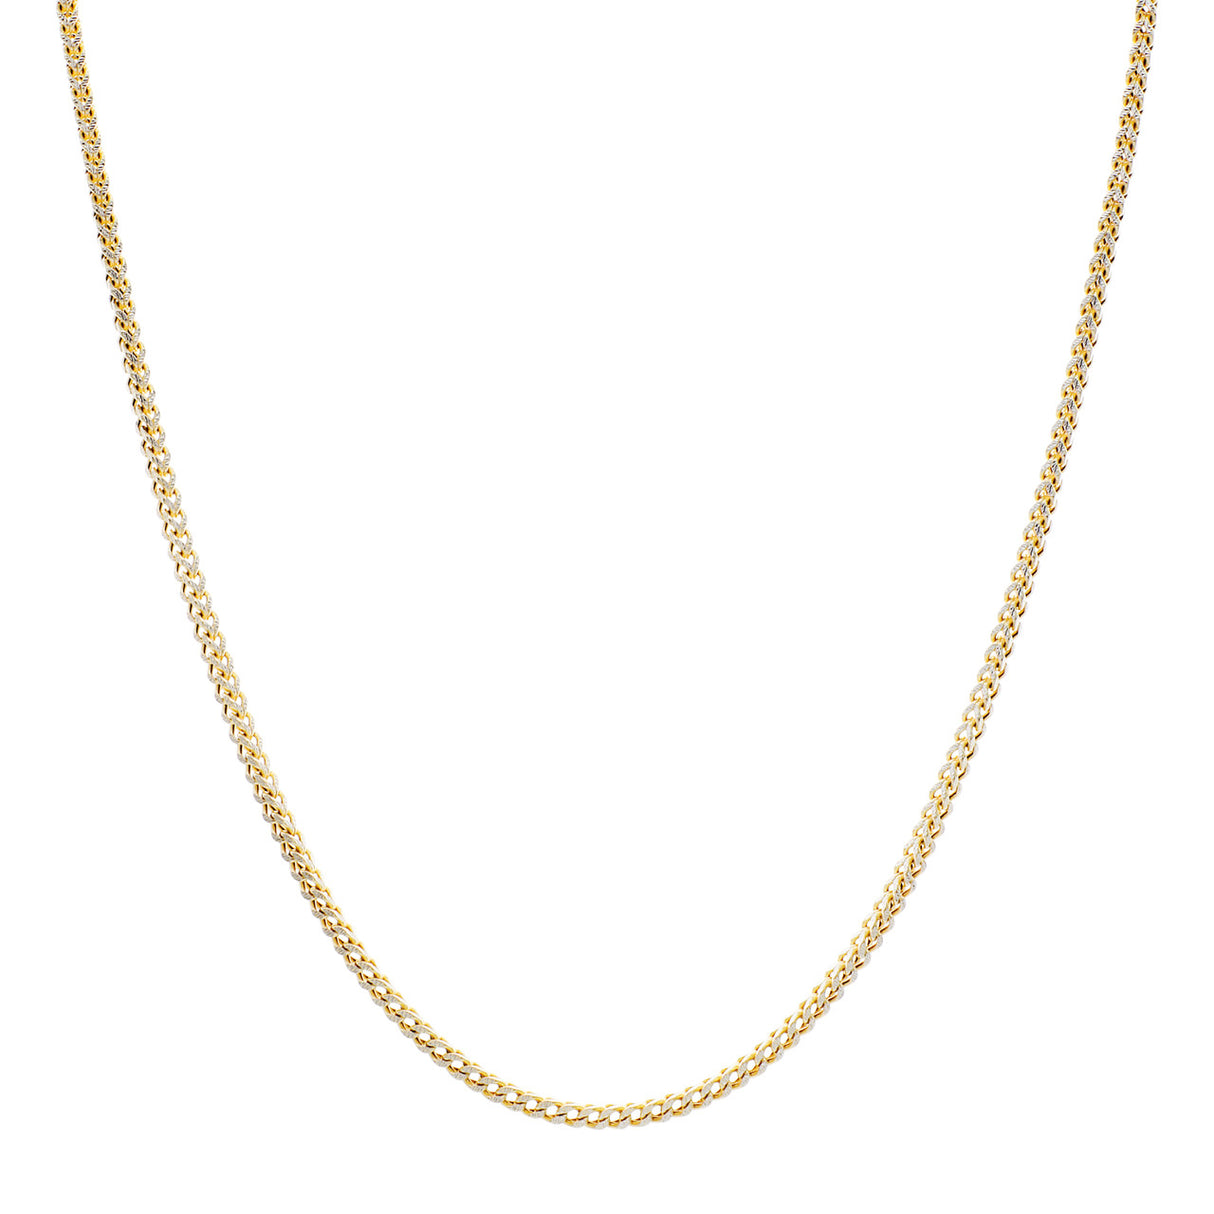 10K Yellow Gold/White Gold Box Link Chain Necklace